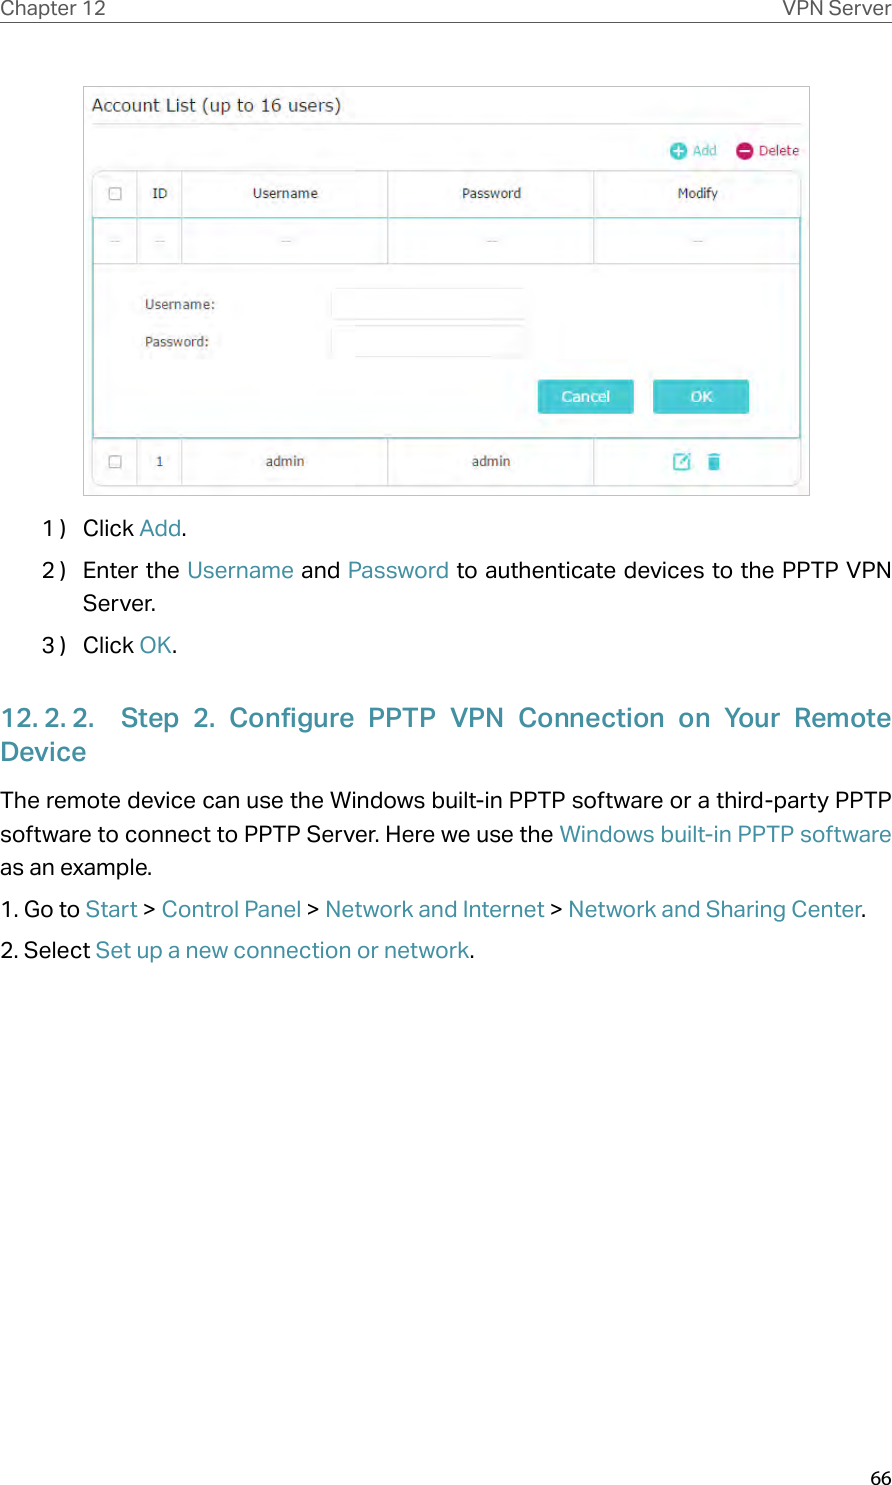 66Chapter 12 VPN Server1 )  Click Add.2 )  Enter the Username and Password to authenticate devices to the PPTP VPN Server.3 )  Click OK.12. 2. 2.  Step 2. Configure PPTP VPN Connection on Your Remote DeviceThe remote device can use the Windows built-in PPTP software or a third-party PPTP software to connect to PPTP Server. Here we use the Windows built-in PPTP software as an example.1. Go to Start &gt; Control Panel &gt; Network and Internet &gt; Network and Sharing Center.2. Select Set up a new connection or network.